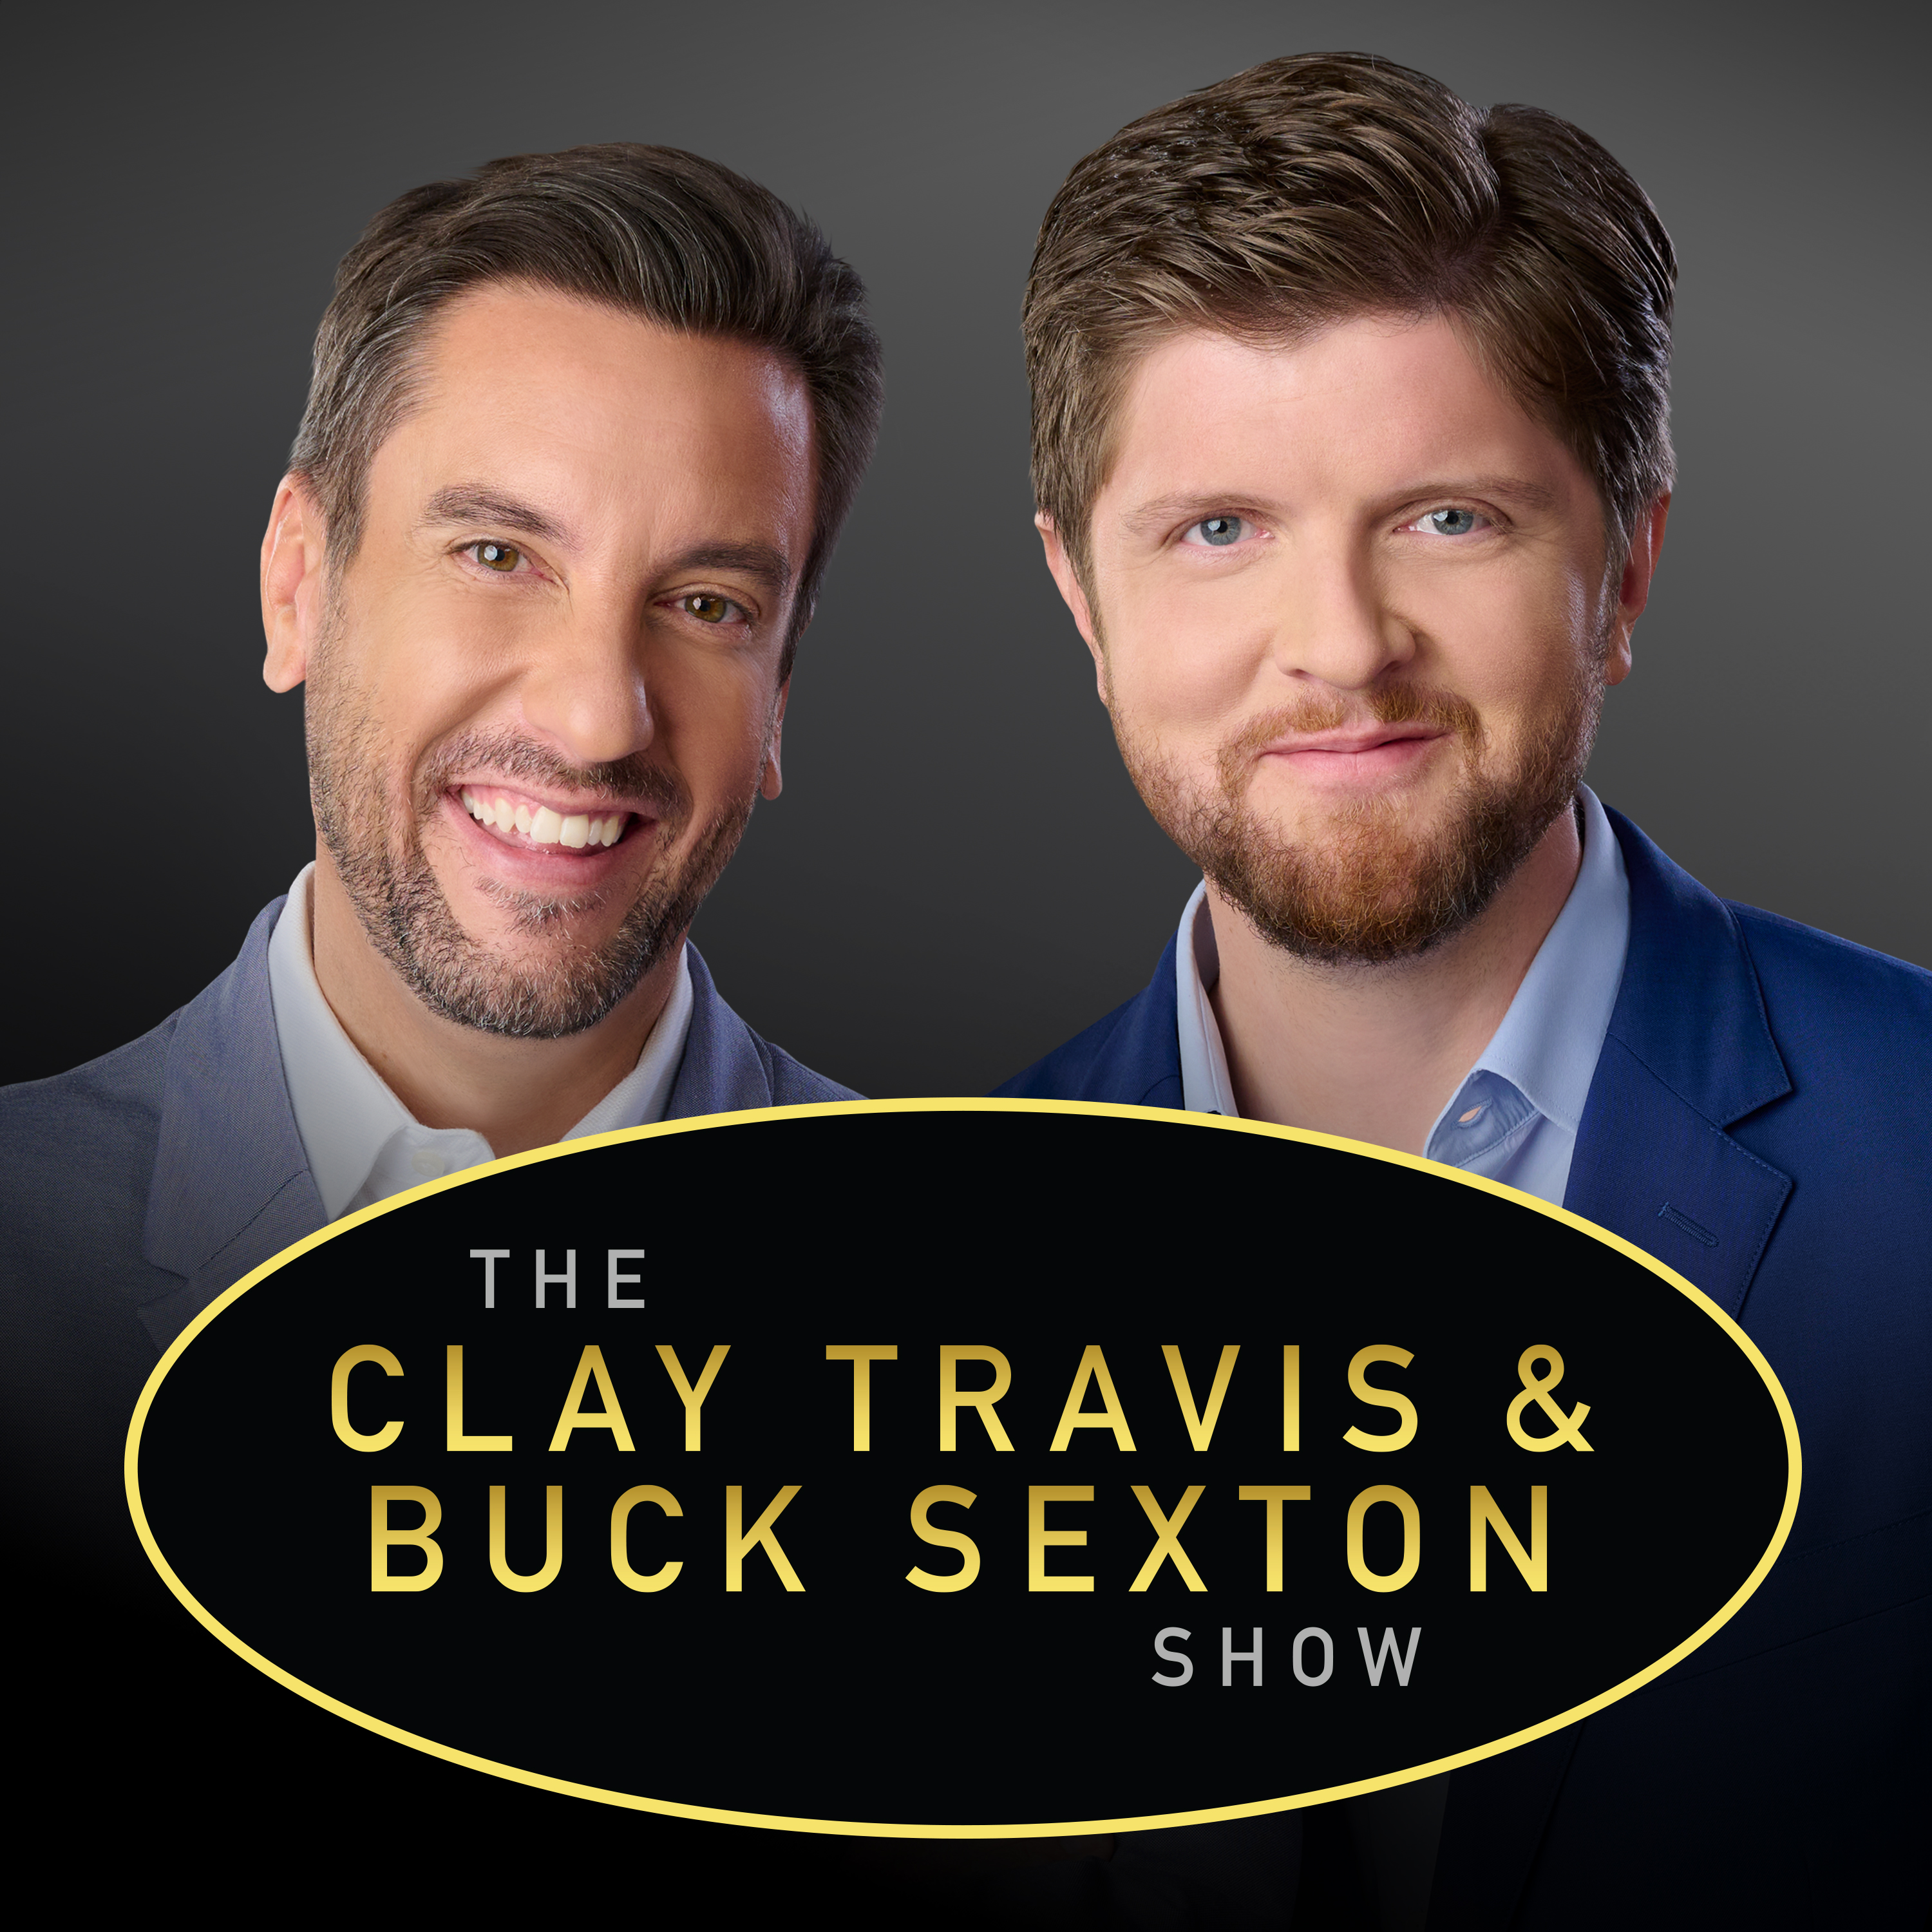 Clay Travis and Buck Sexton Show H1 – Jul 28 2022